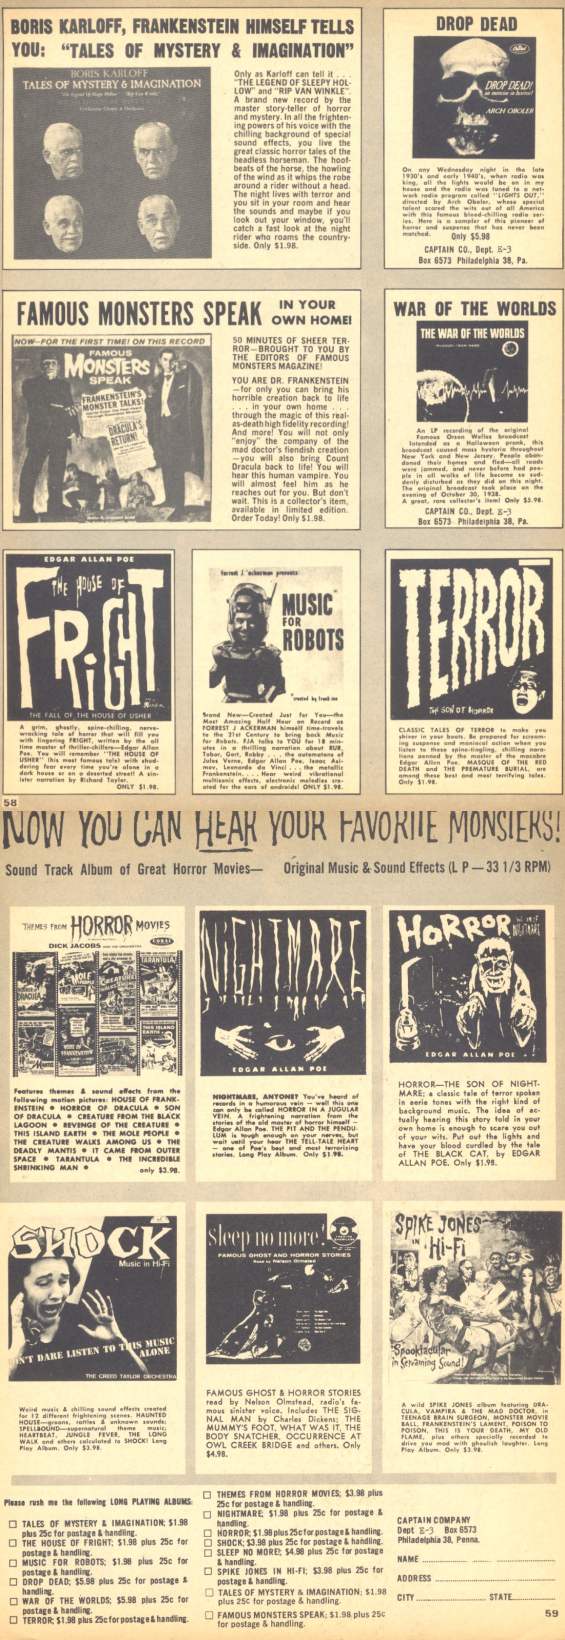 Eerie magazine ad from 1966 - Now You Can Hear Your Favorite Monsters